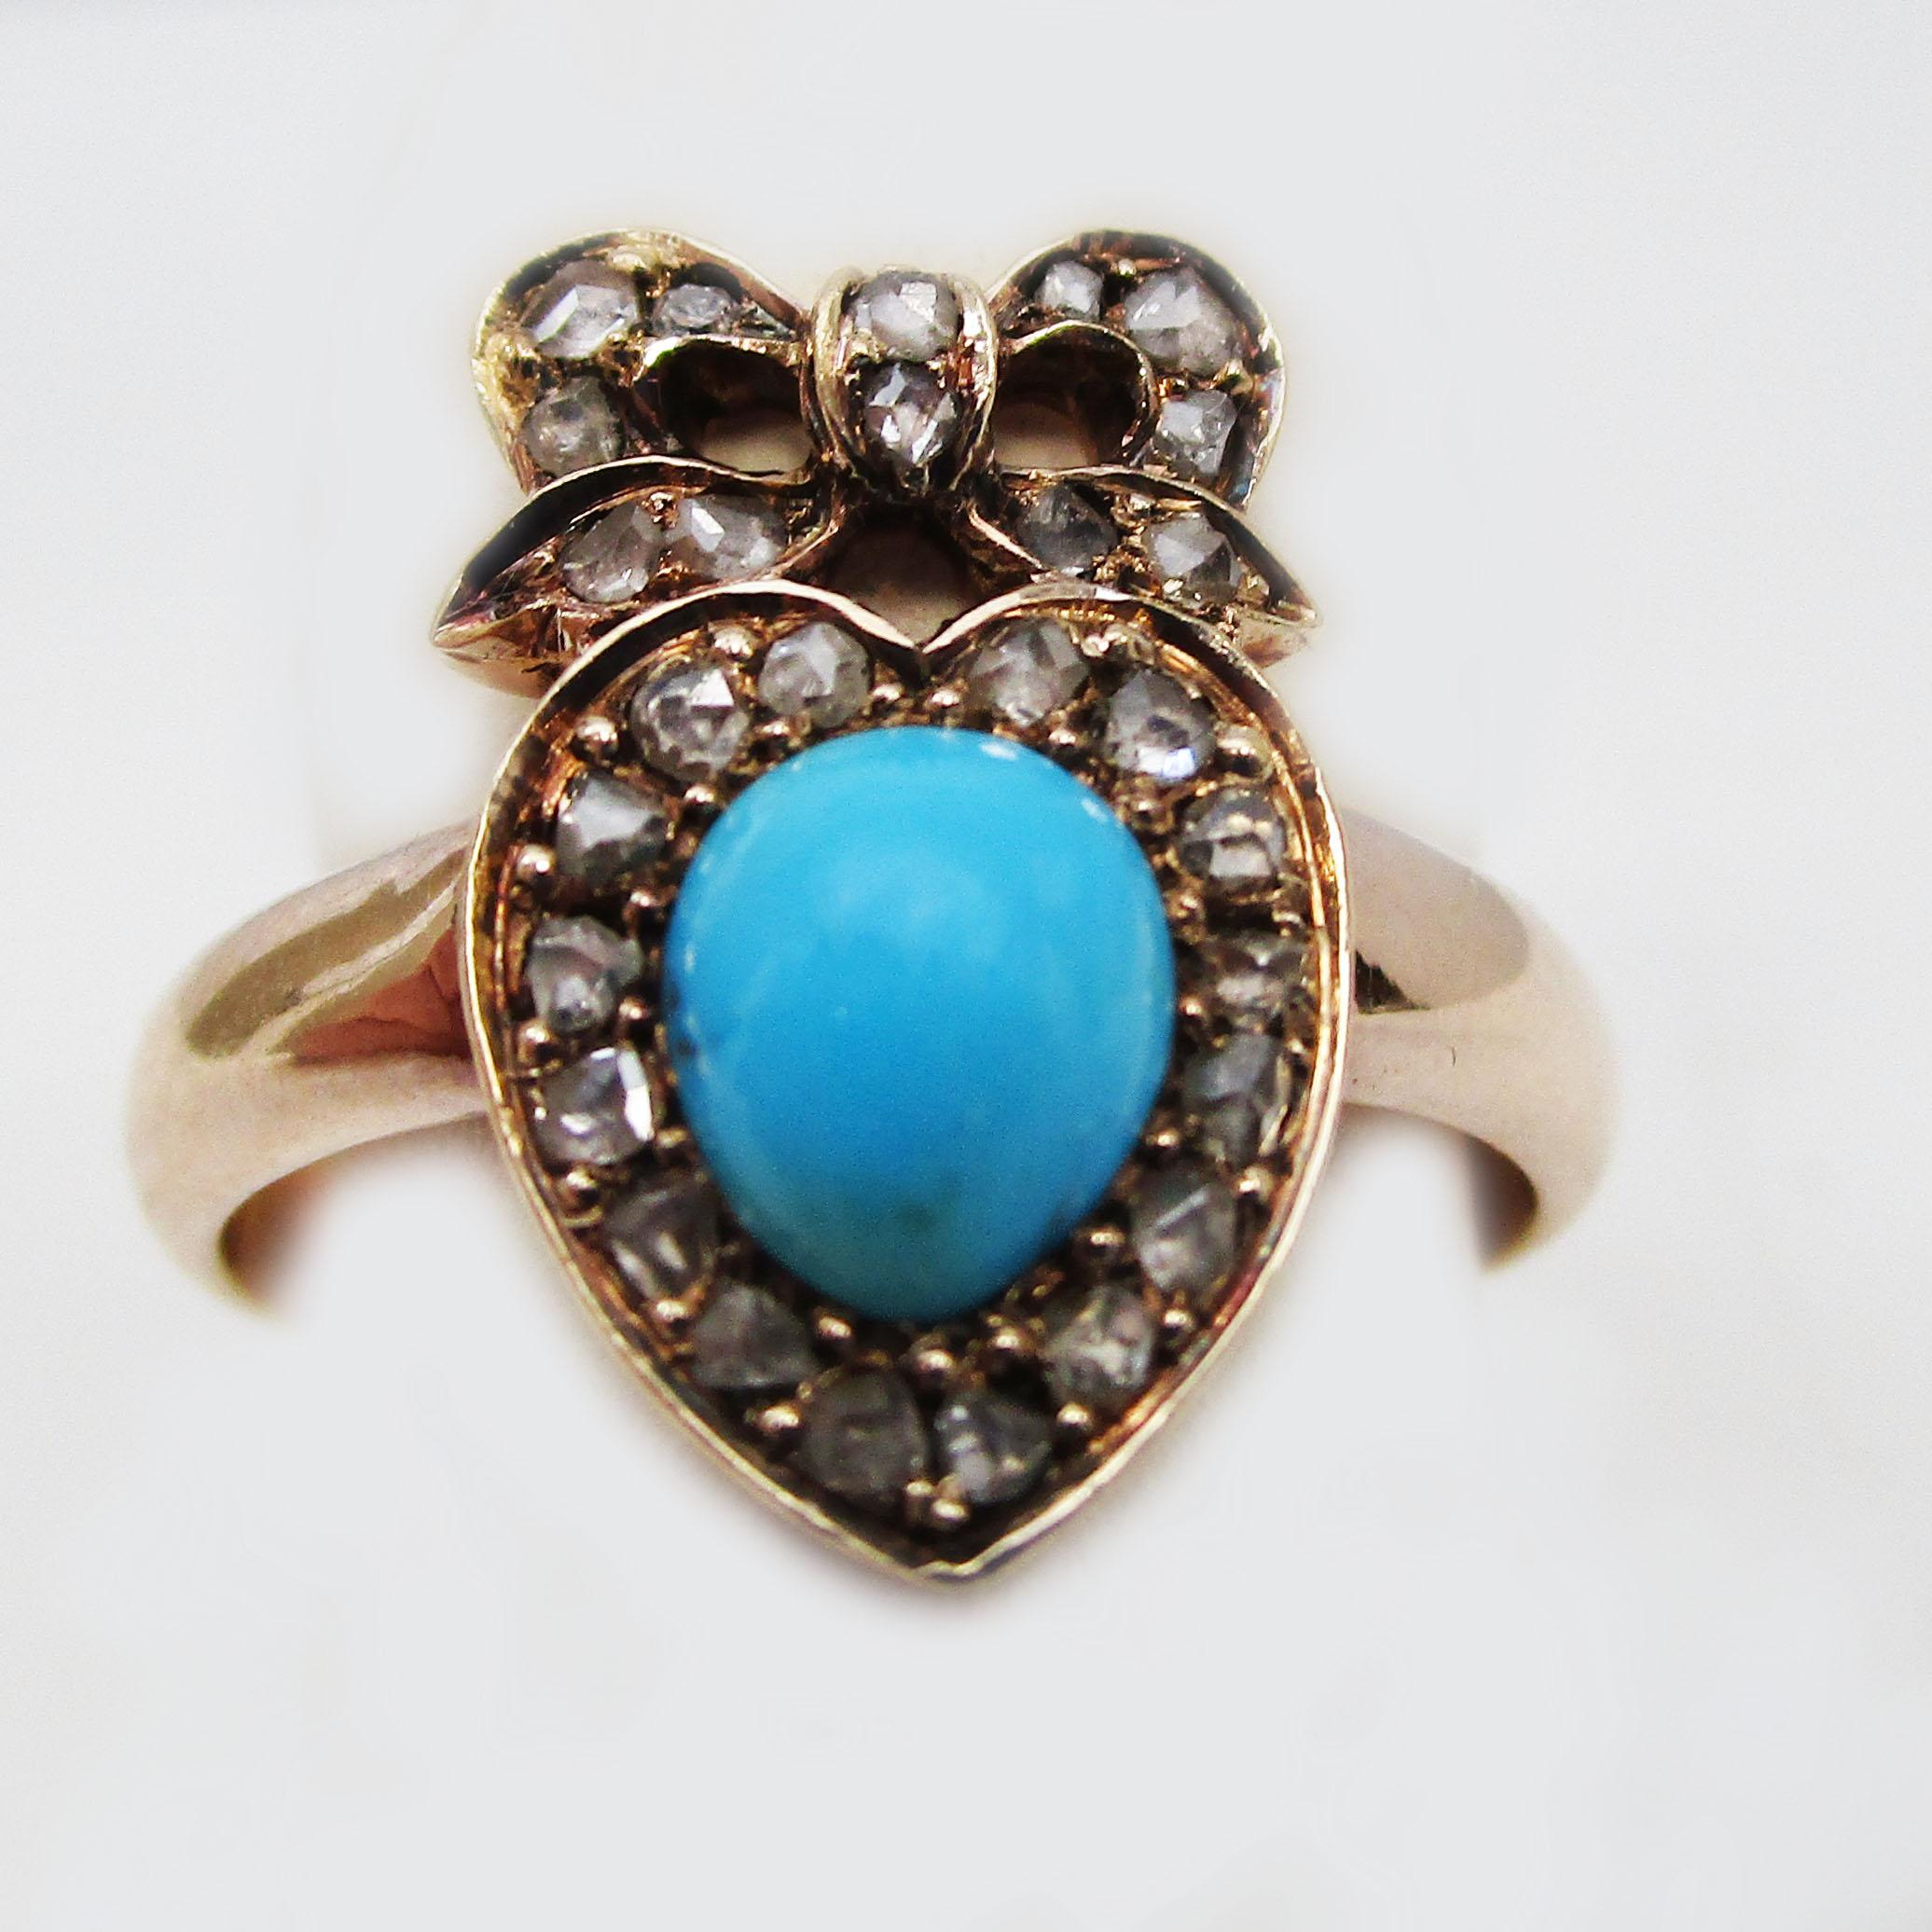 This ring is just marvelous! Set in beautiful 14K rose gold, this ring boasts a lovely undyed natural Persian turquoise and 28 rose-cut diamonds! This period-correct ring dates to about 1850 - when candle light would have made the reflective